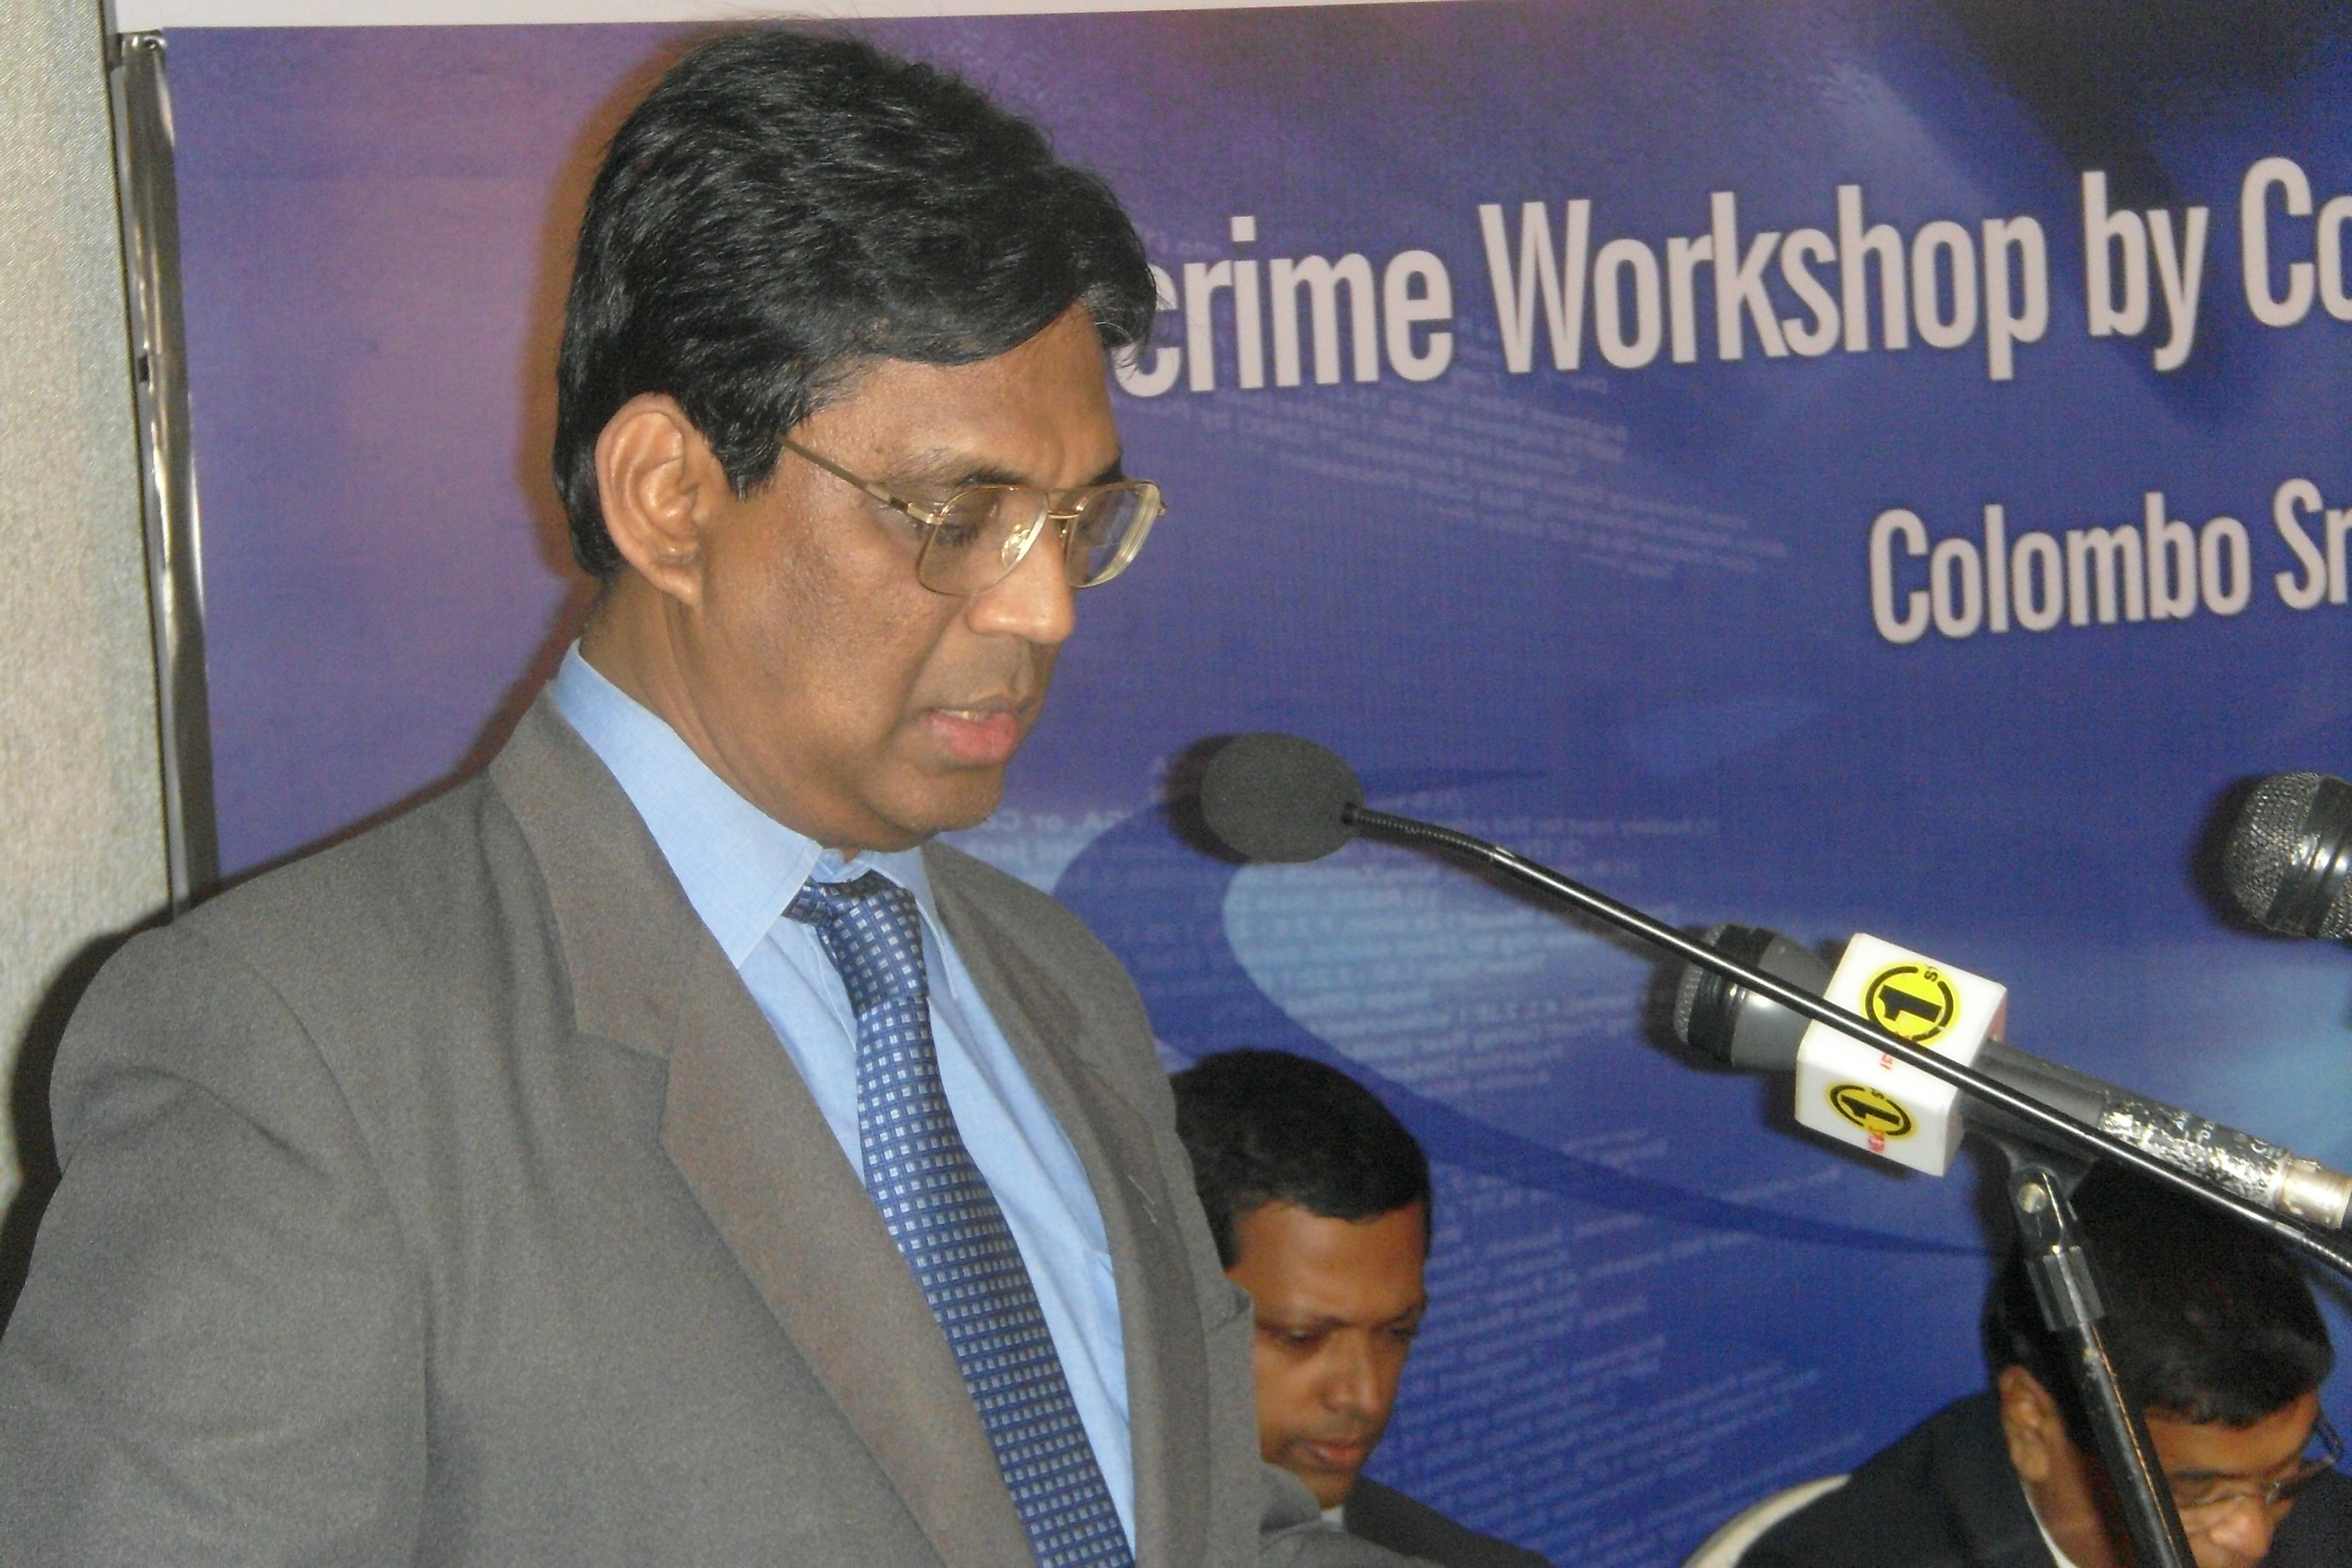 Cybercrime Workshop by Council of Europe in Association with ICTA, 27-28 October 2008